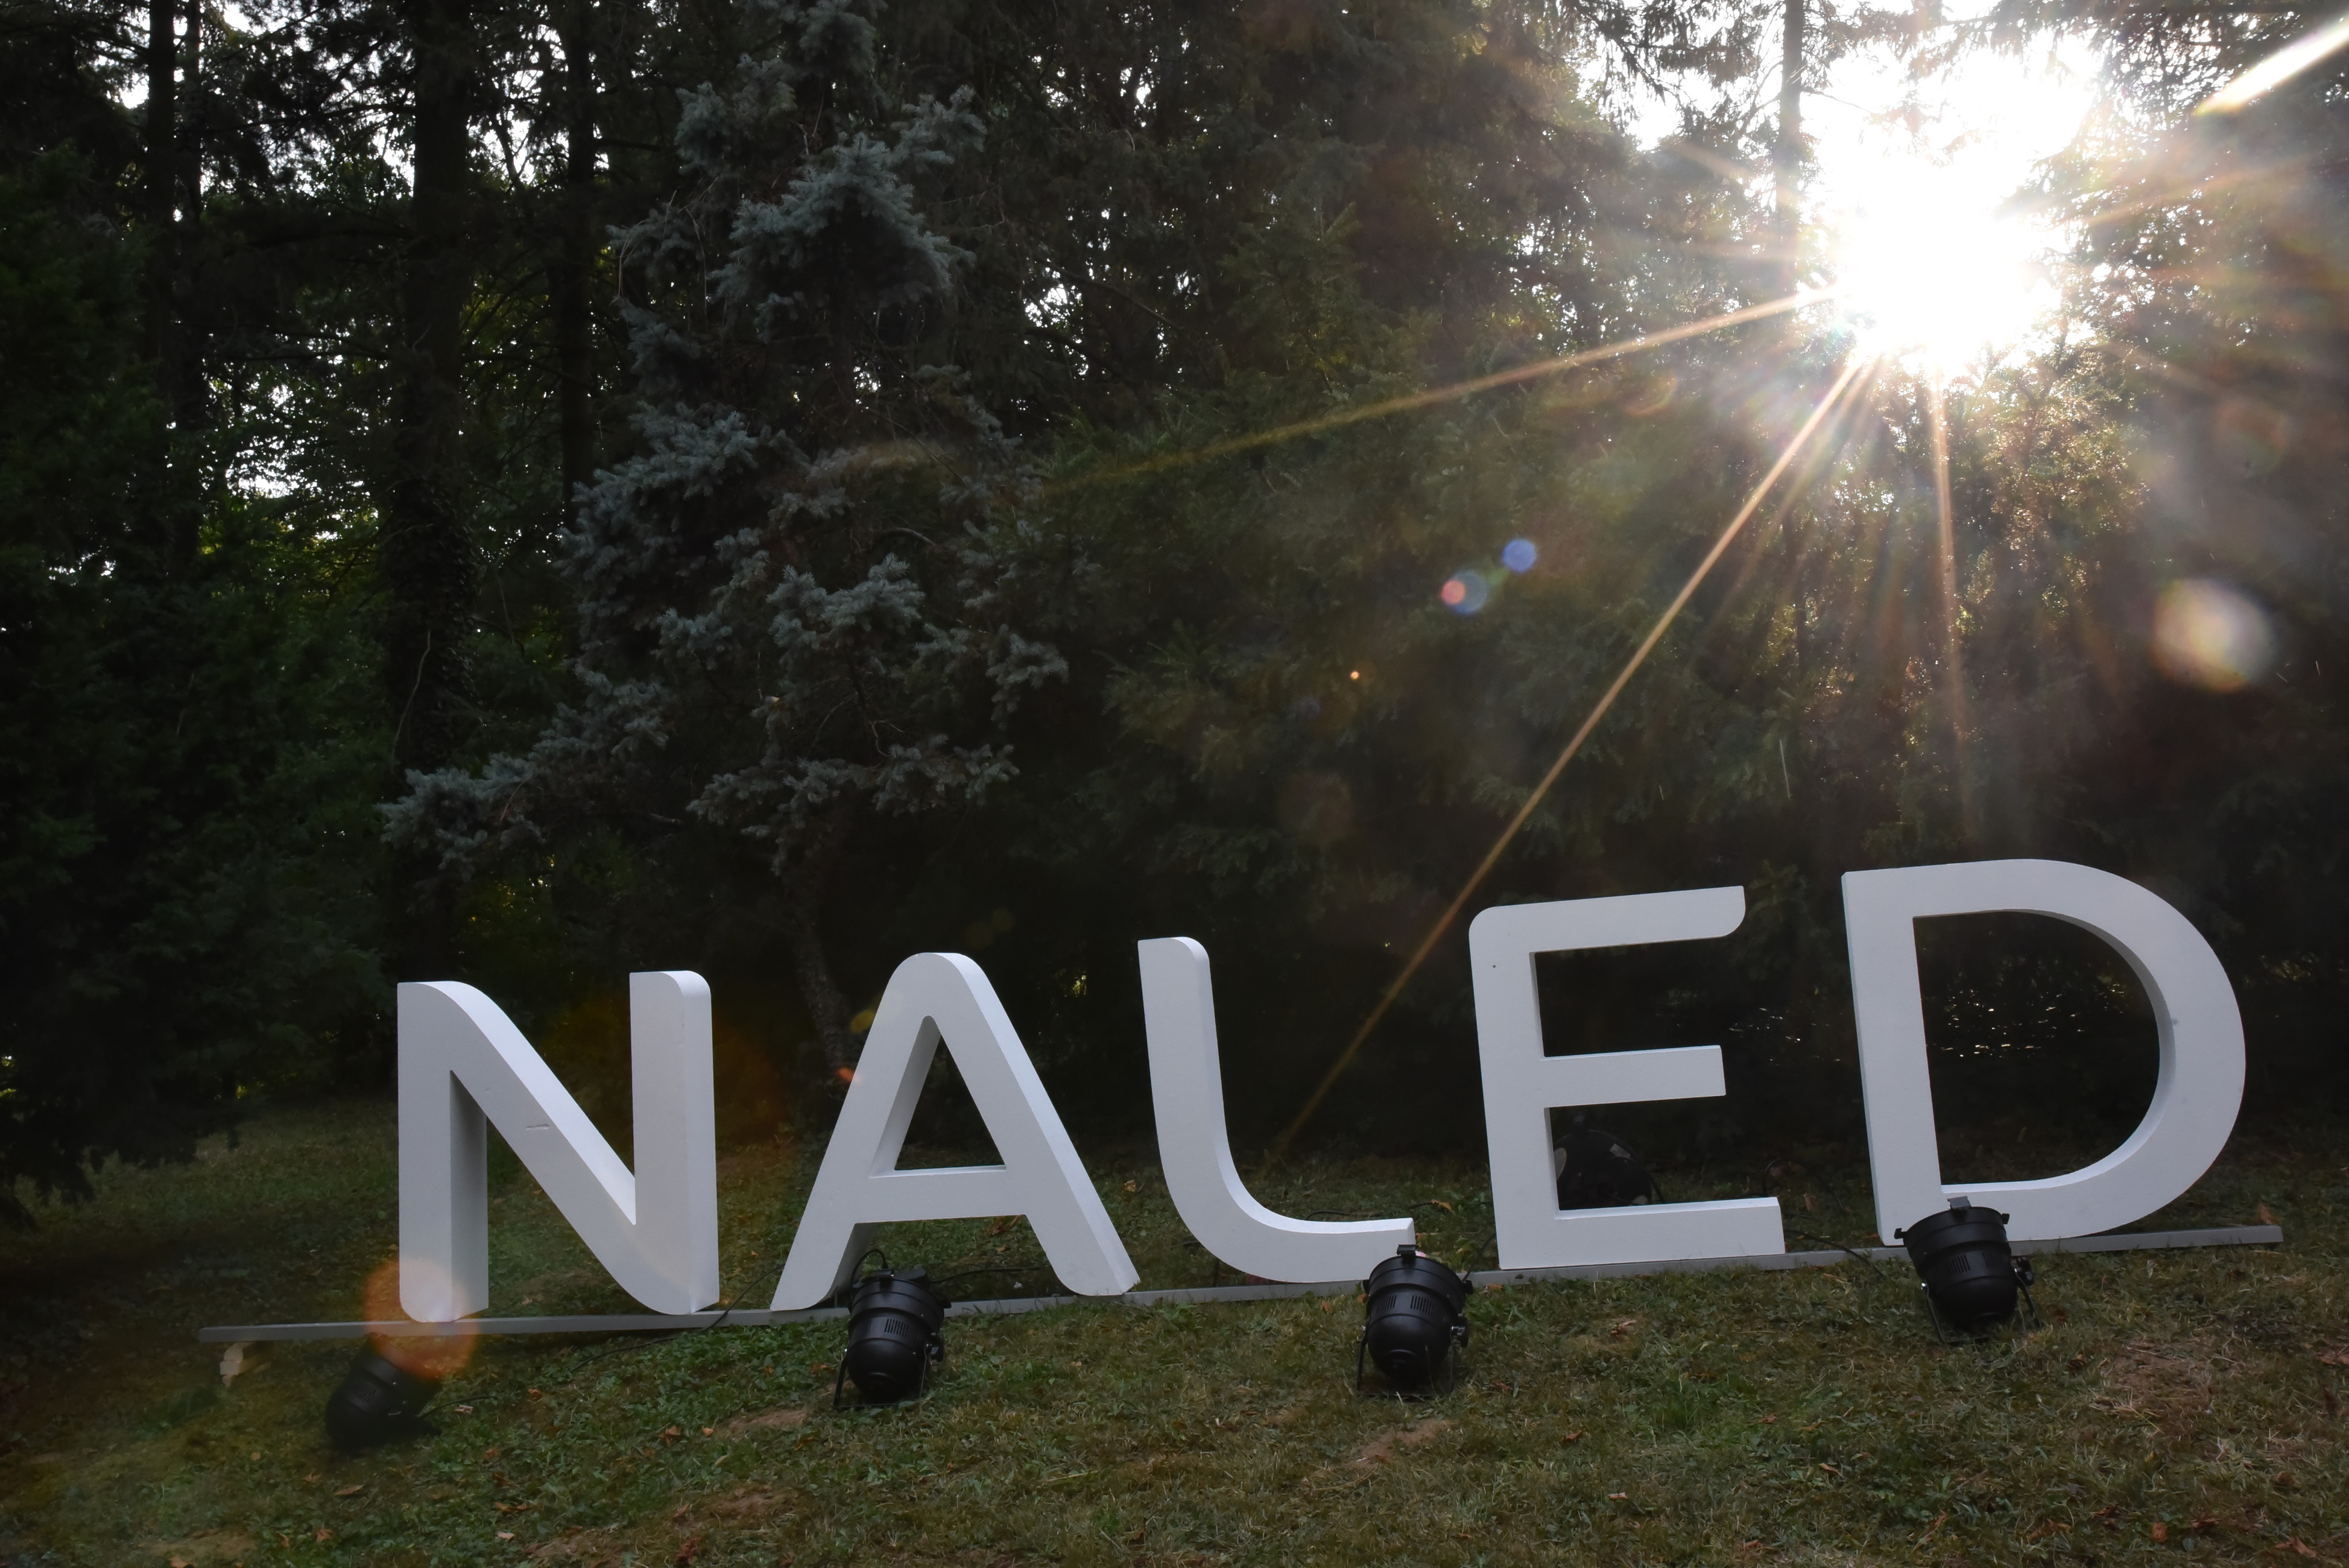 More than 800 members and partners at NALED's September Gathering